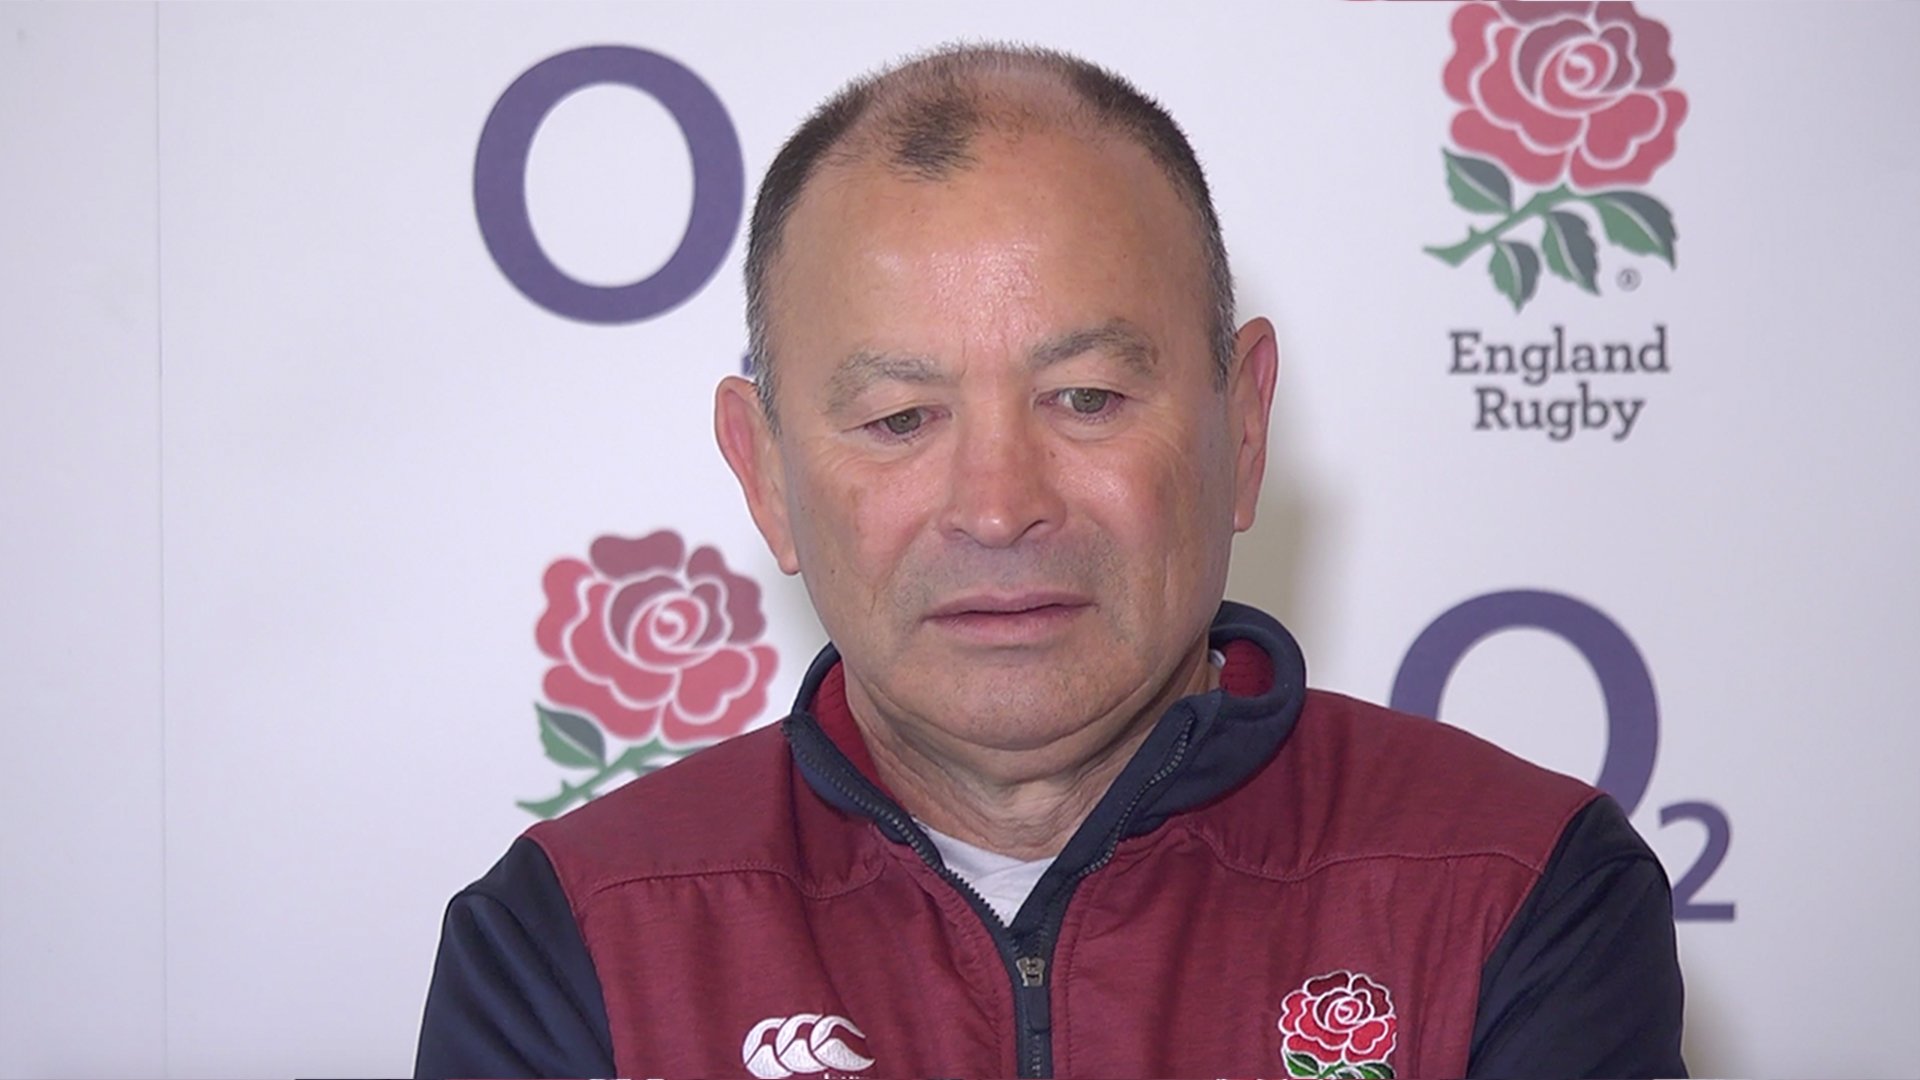 Eddie Jones acts completely differently from last week in Six Nations press conference